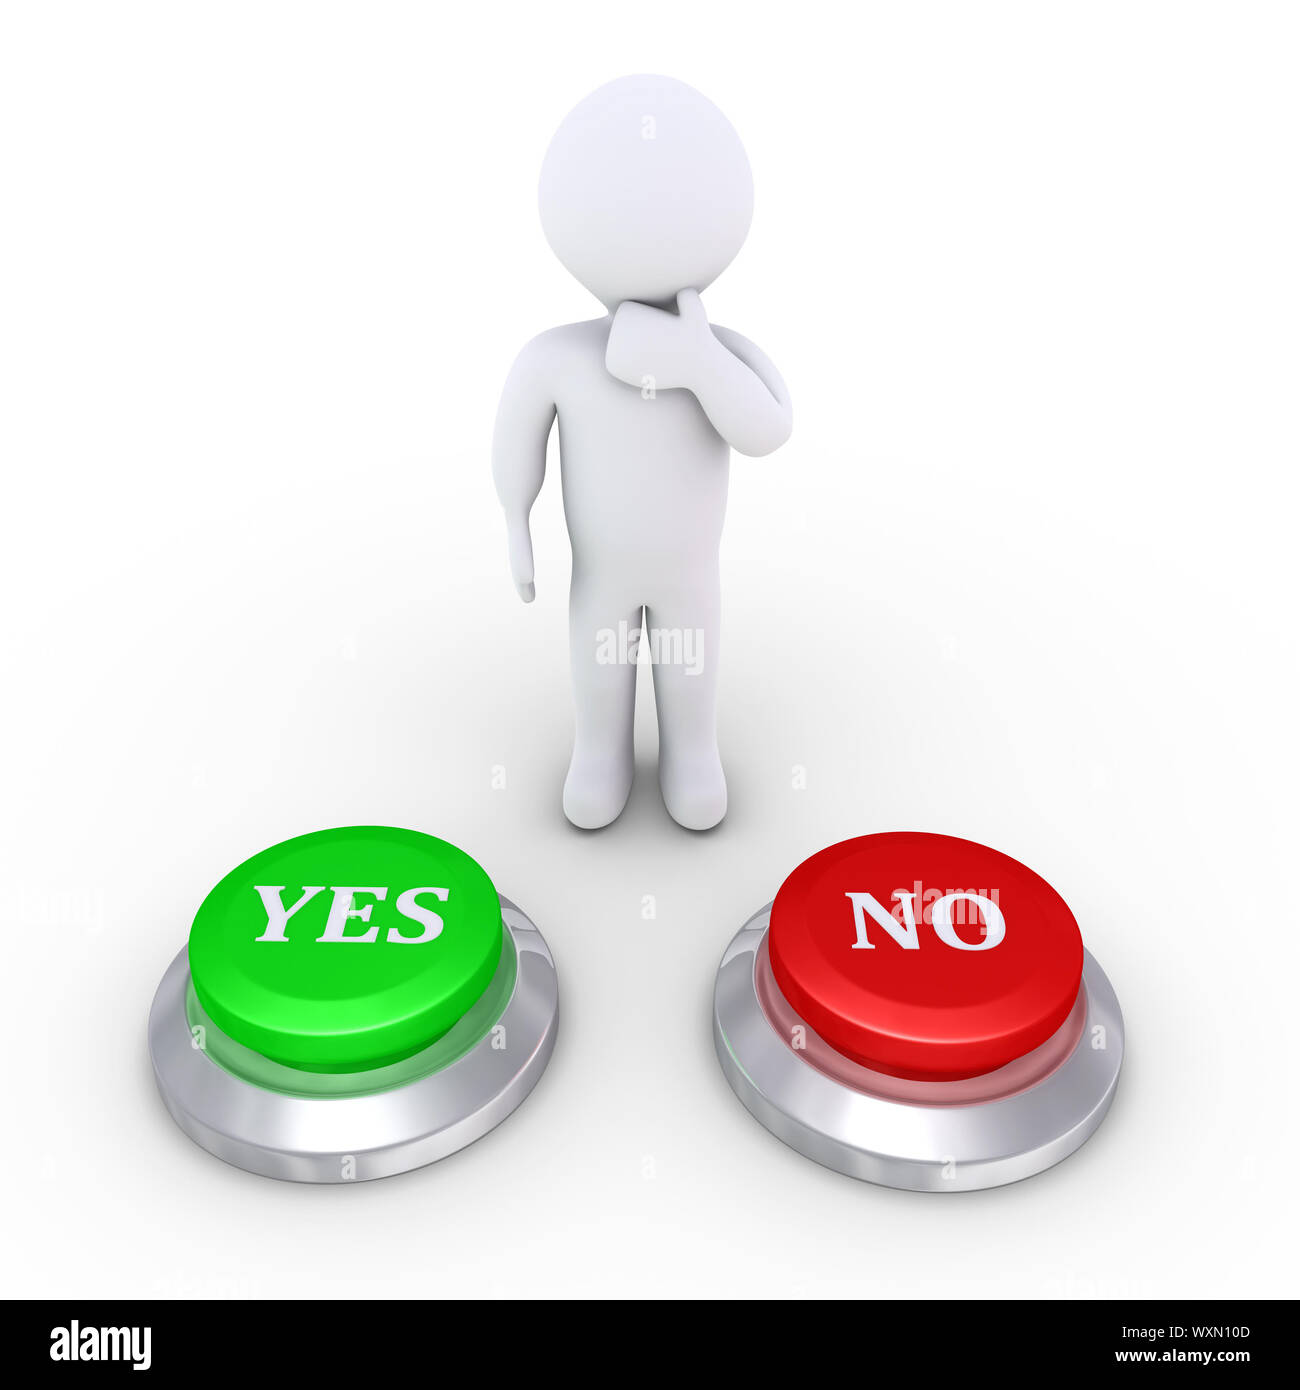 Yes Button / No Button